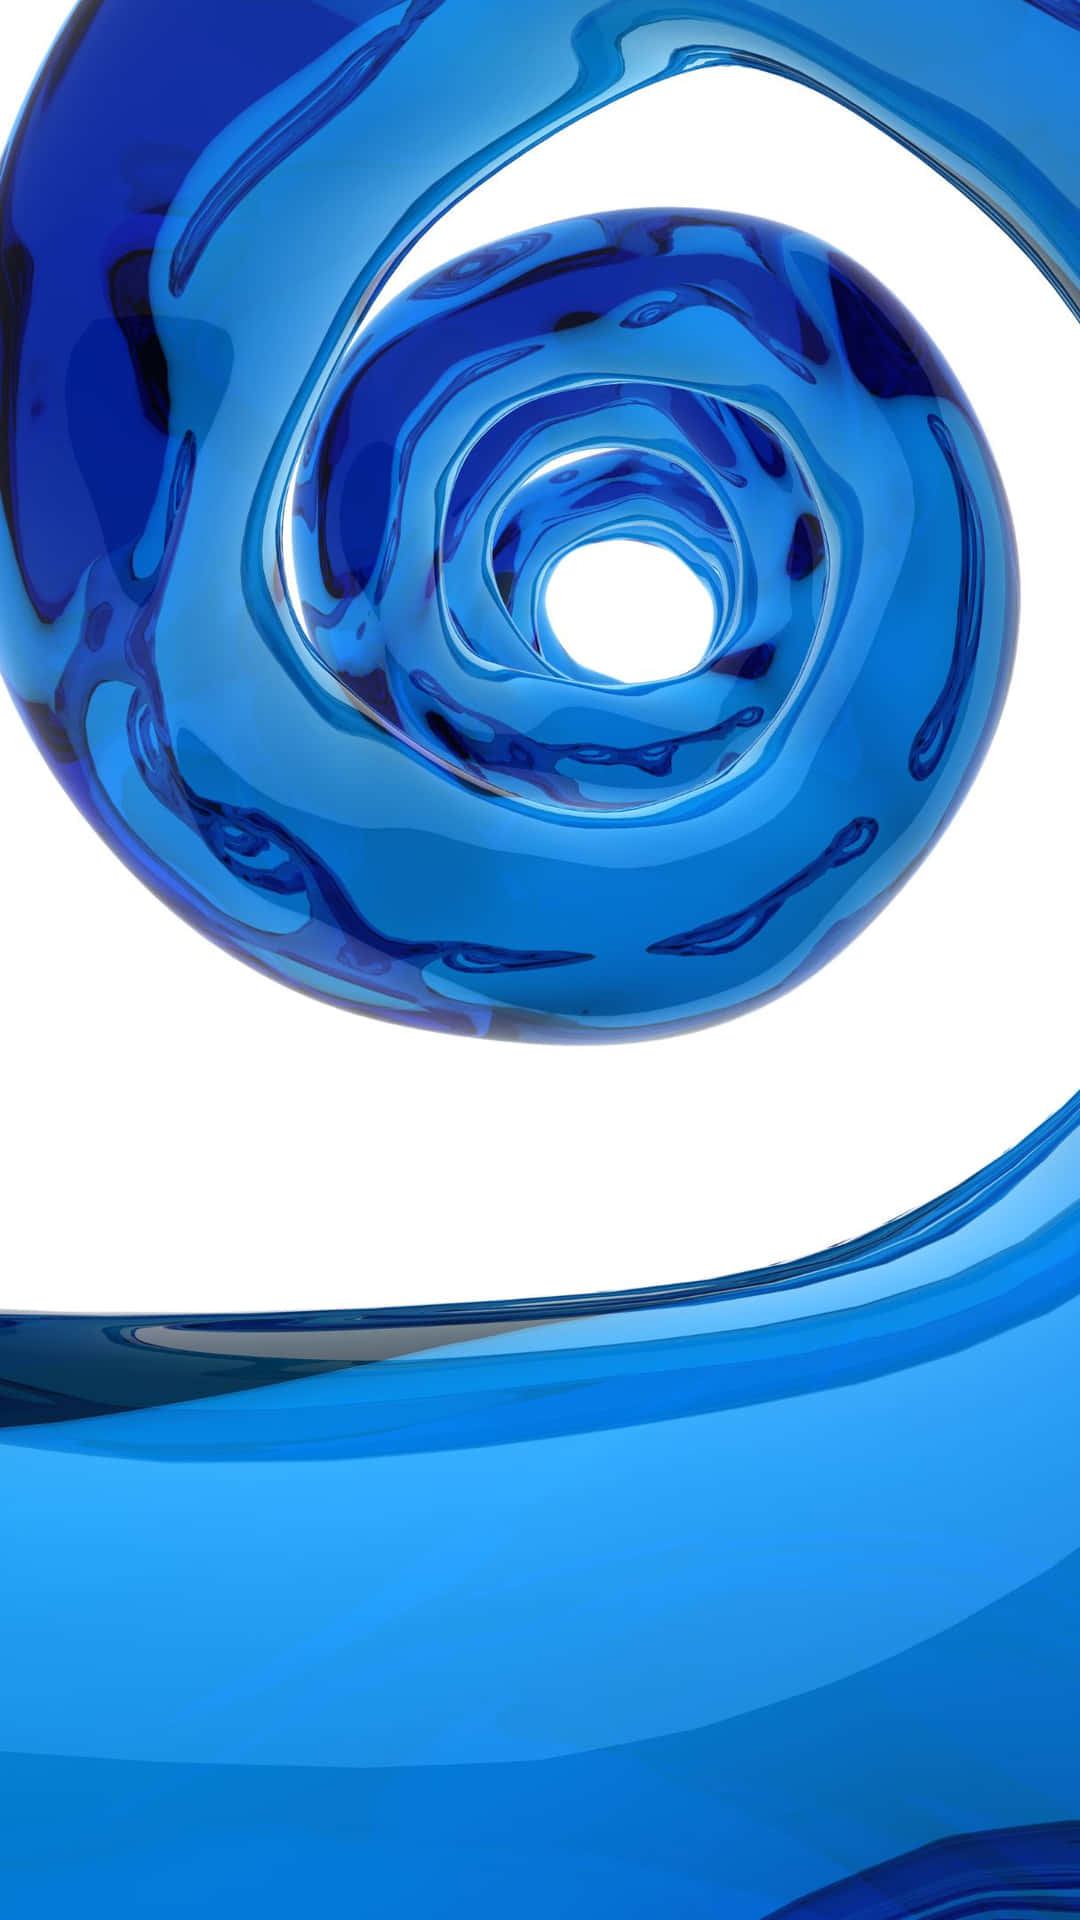 Abstract blue swirl pattern for a vibrant background